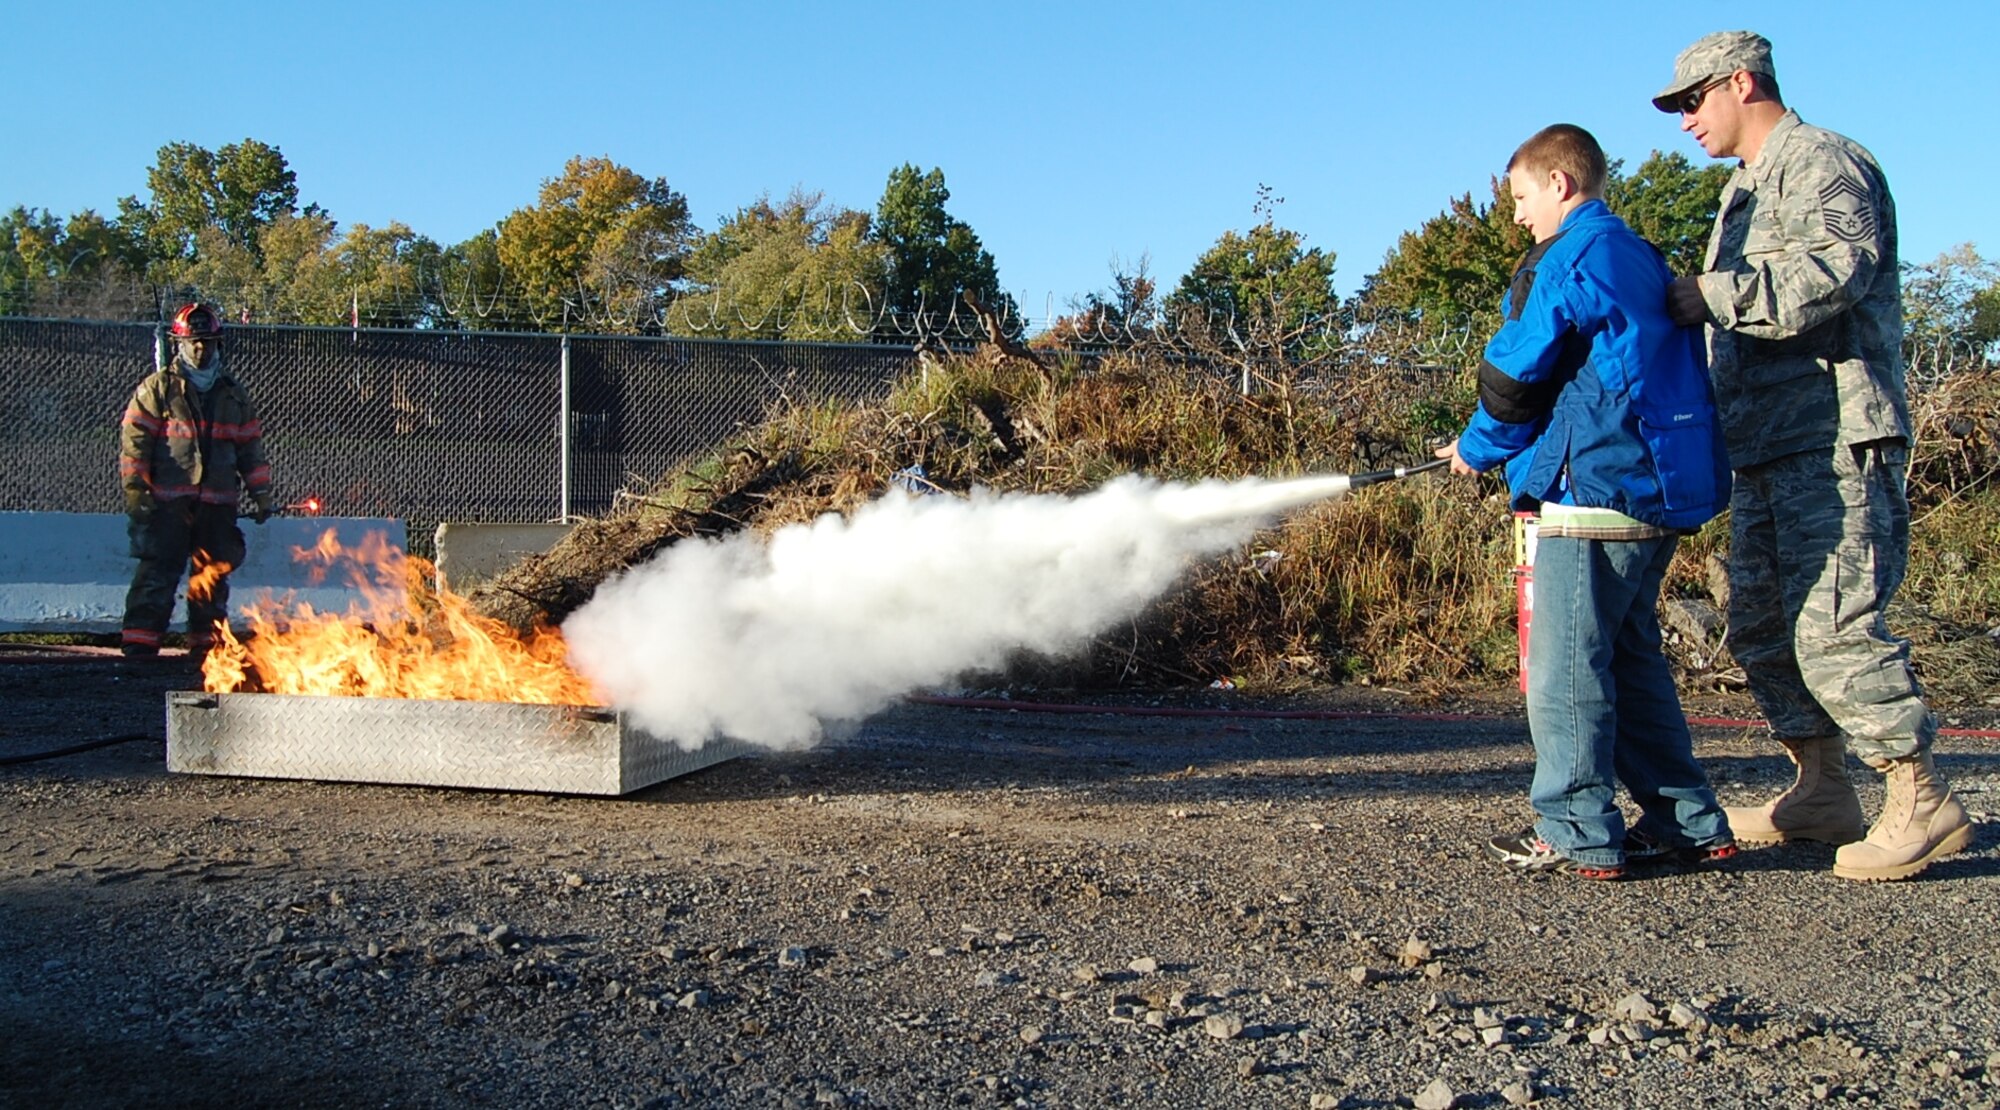 Chief Master Sgt. Tim Hill, 231st Civil Engineer Flight fire chief, teaches his son, Zach Hill, how to properly use a fire extinguisher to put out a fire Oct. 18. The 231st teamed up with a local fire department to help teach servicemembers fire safety in honor of Fire Safety Month. (Photo by Senior Airman Jessica Donnelly)